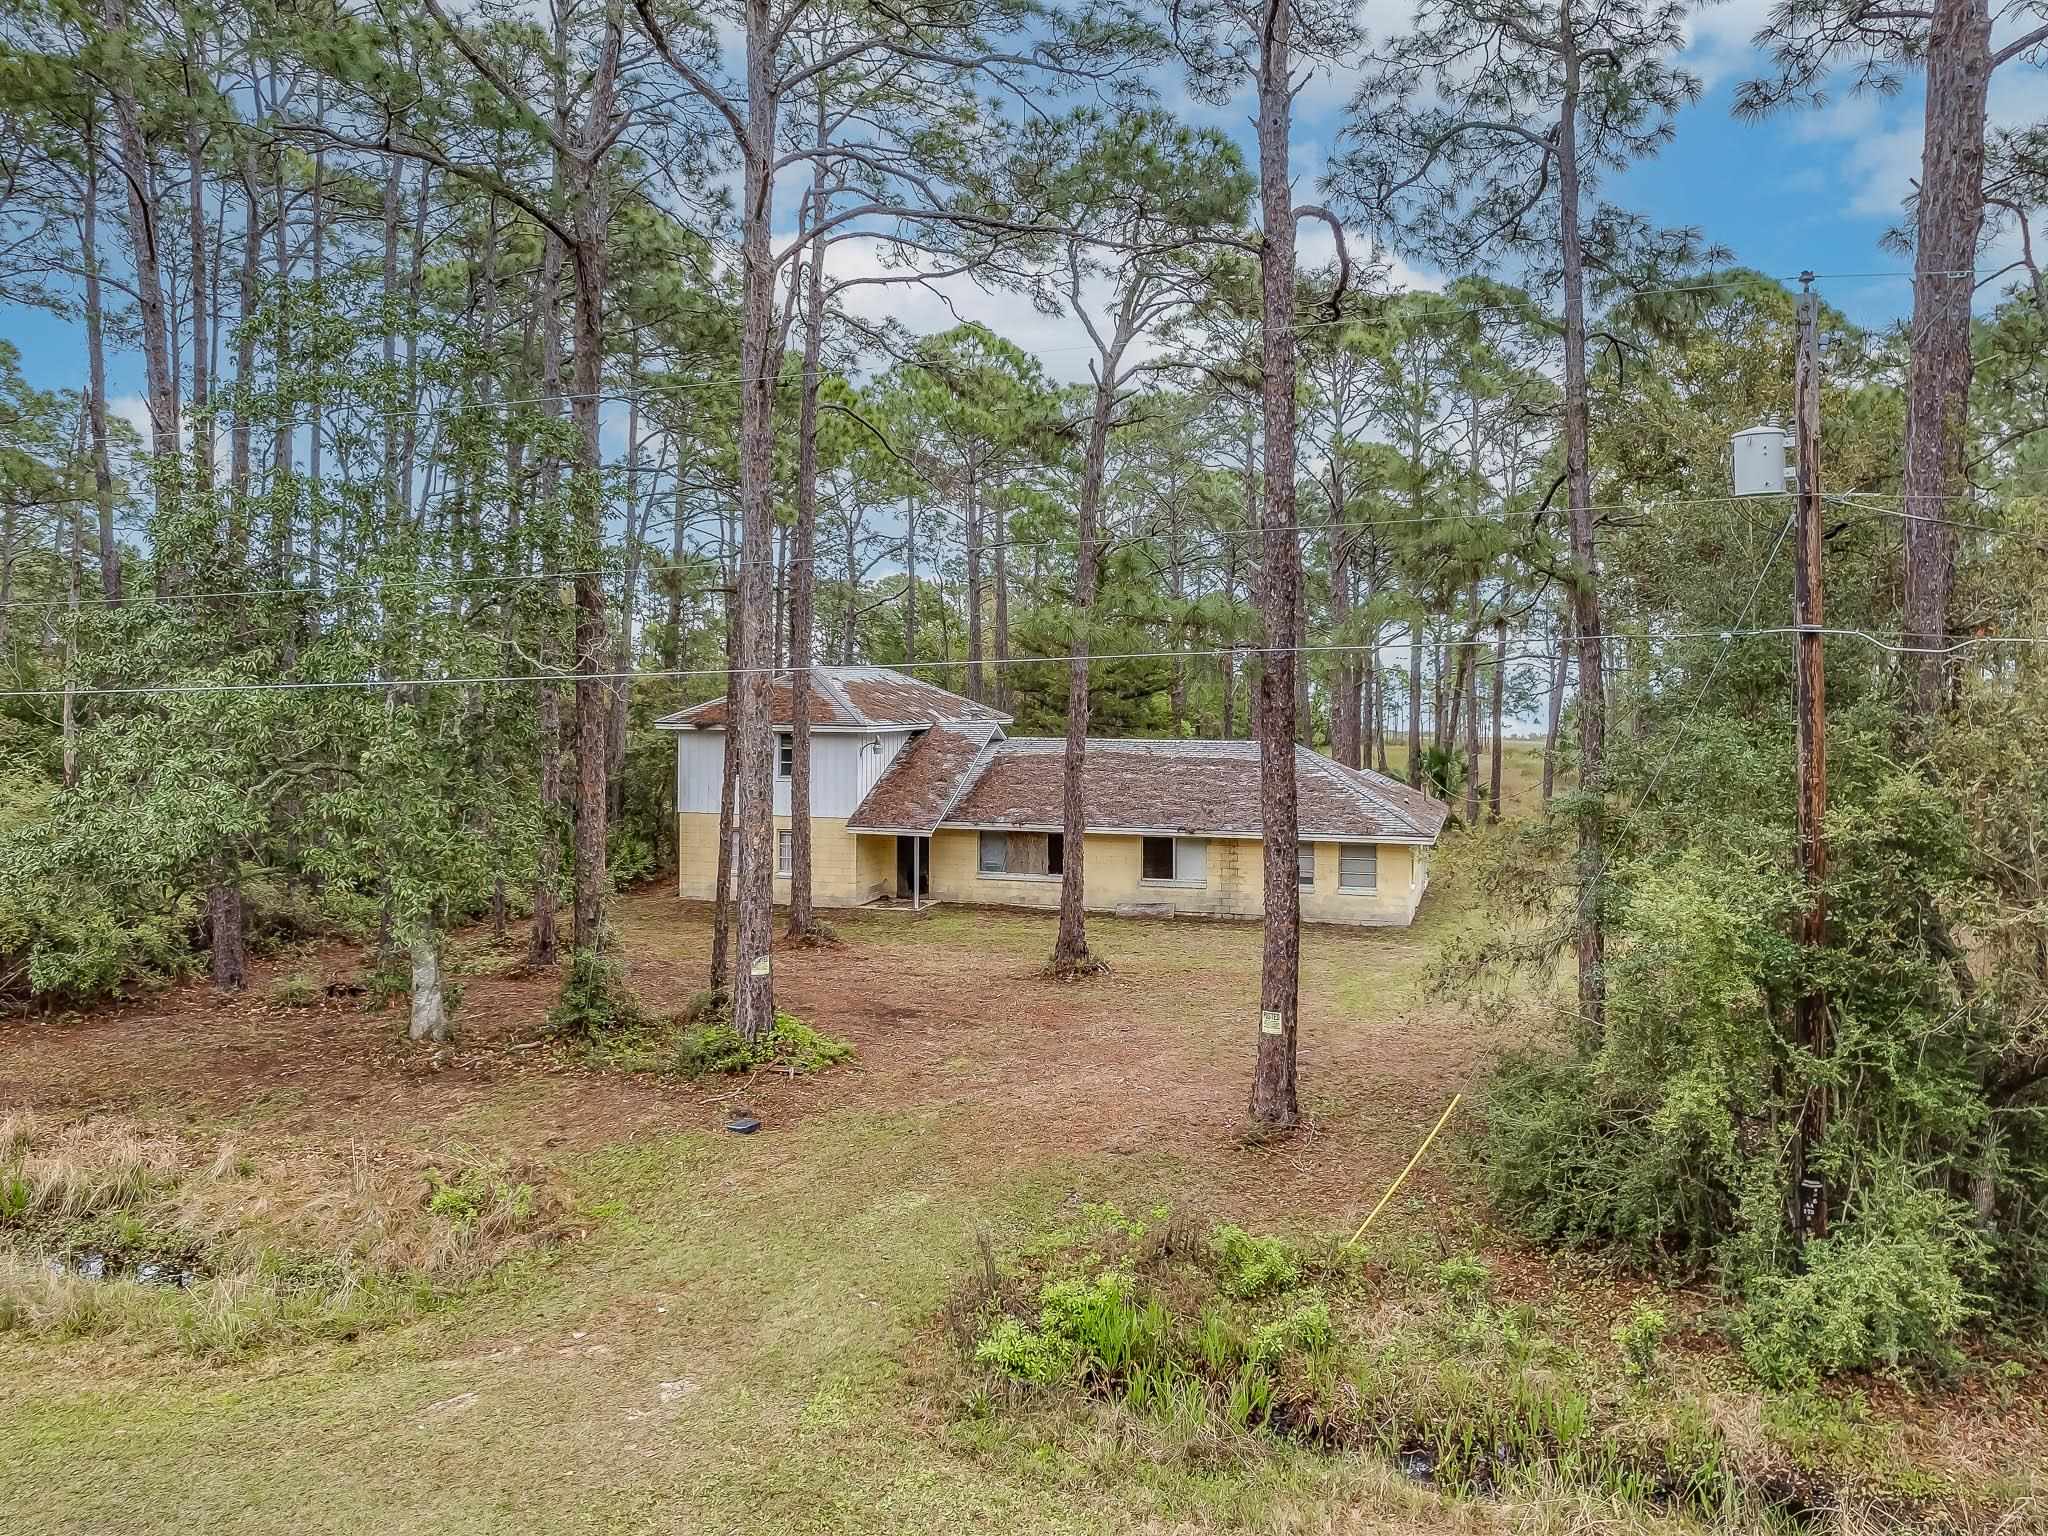 216 Levy bay,PANACEA,Florida 32346,Lots and land,Levy bay,369850